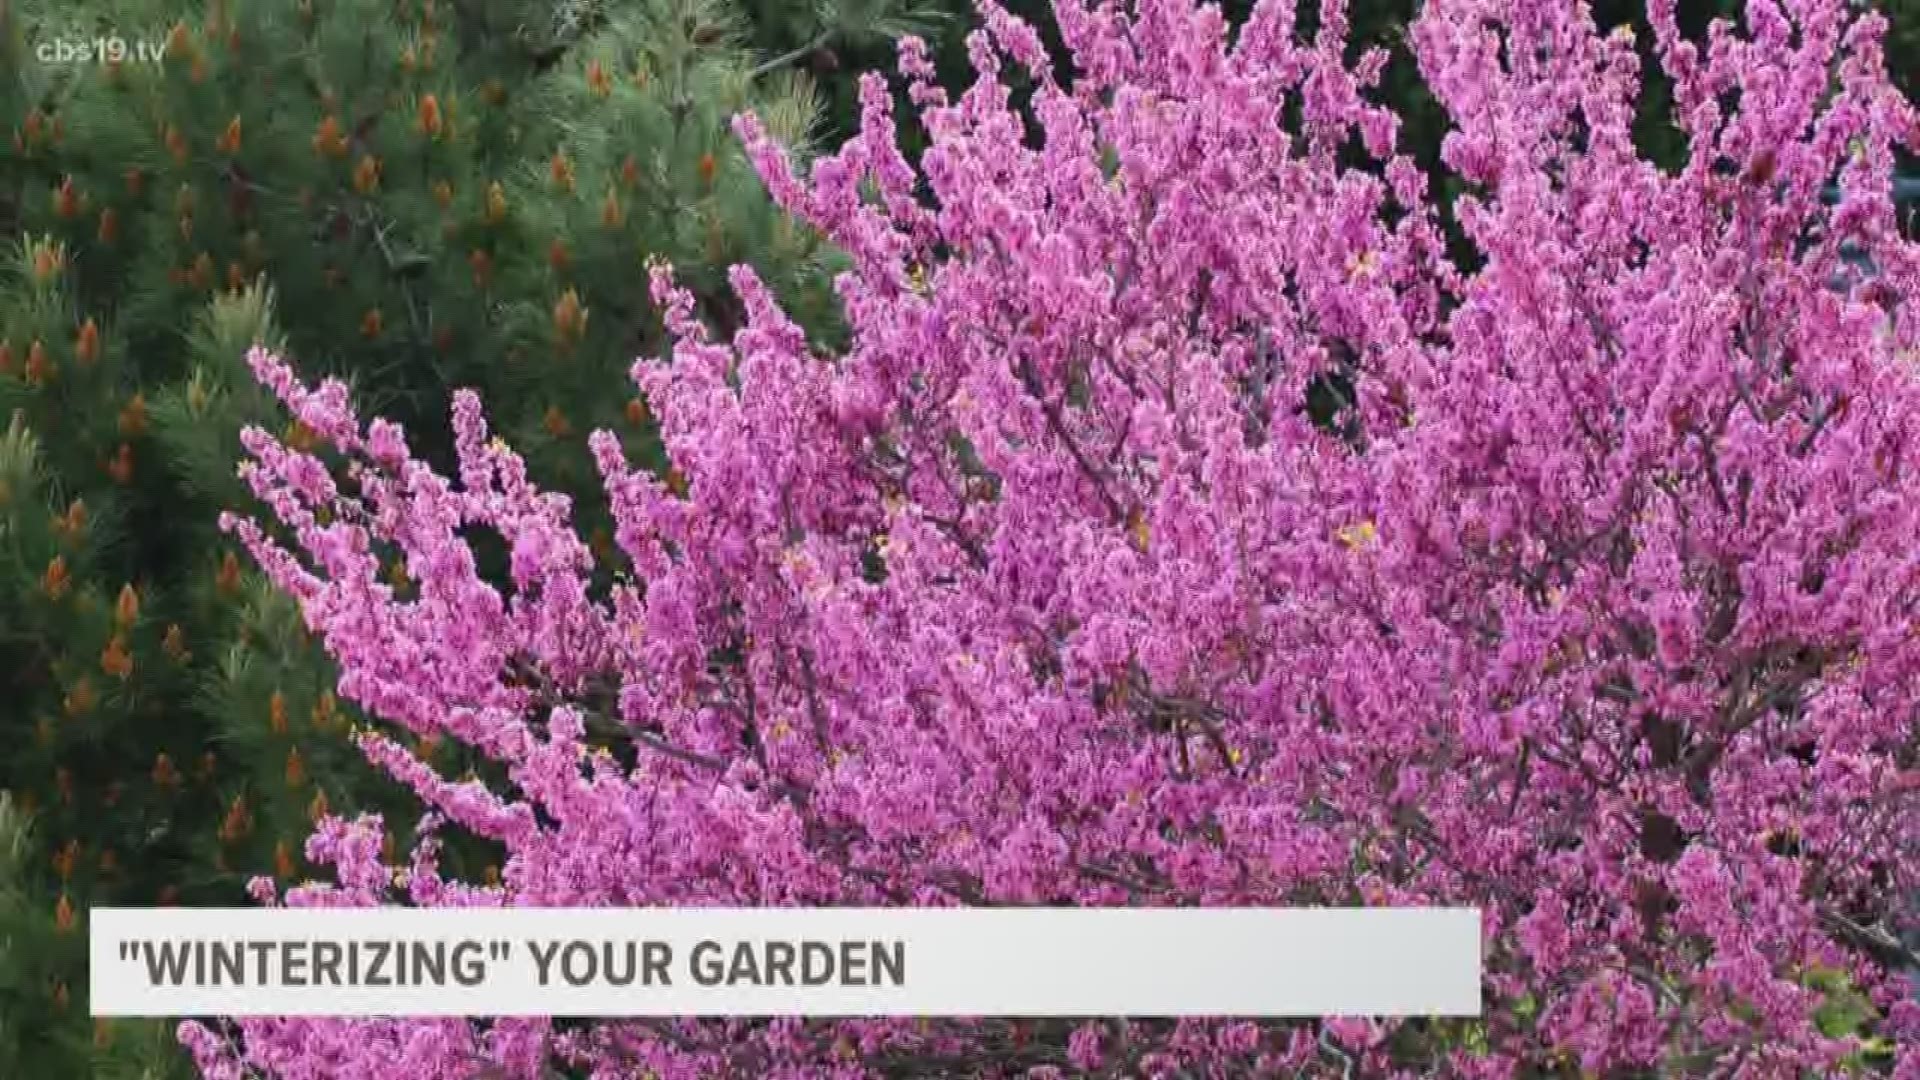 The first freeze of the year is here and that can have an effect on your pipes, homes and so much more, but what about your plants? 
Master gardener of Smith County, Wayne Elliott tells us how you can keep those plants healthy despite the cold temperature